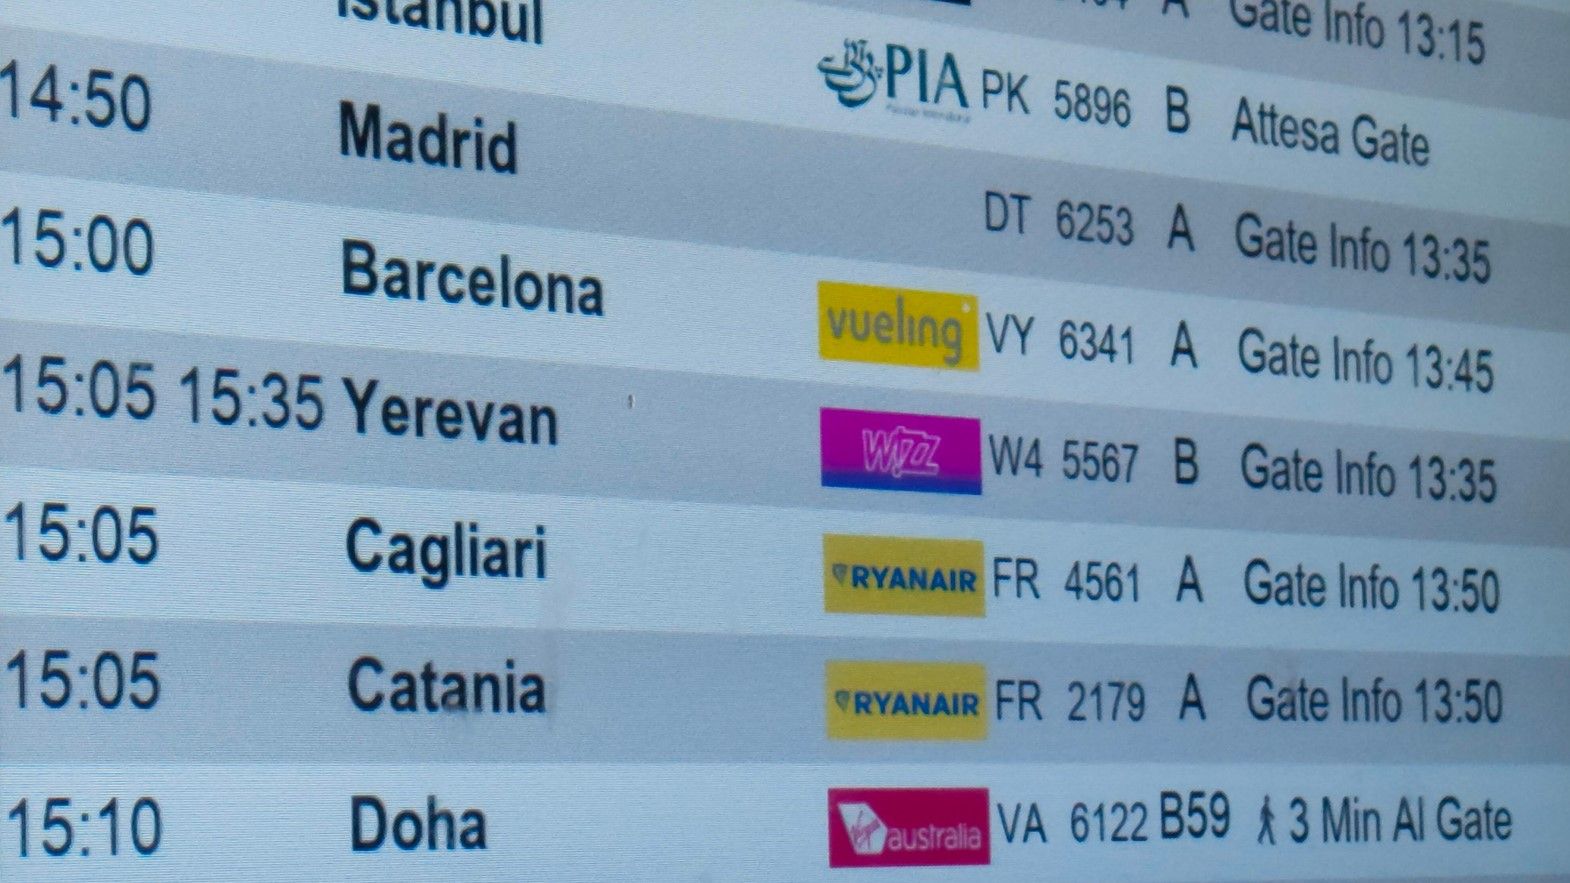 Timetable of the flight schedule in the airport. Barcelona flight is in the focus.